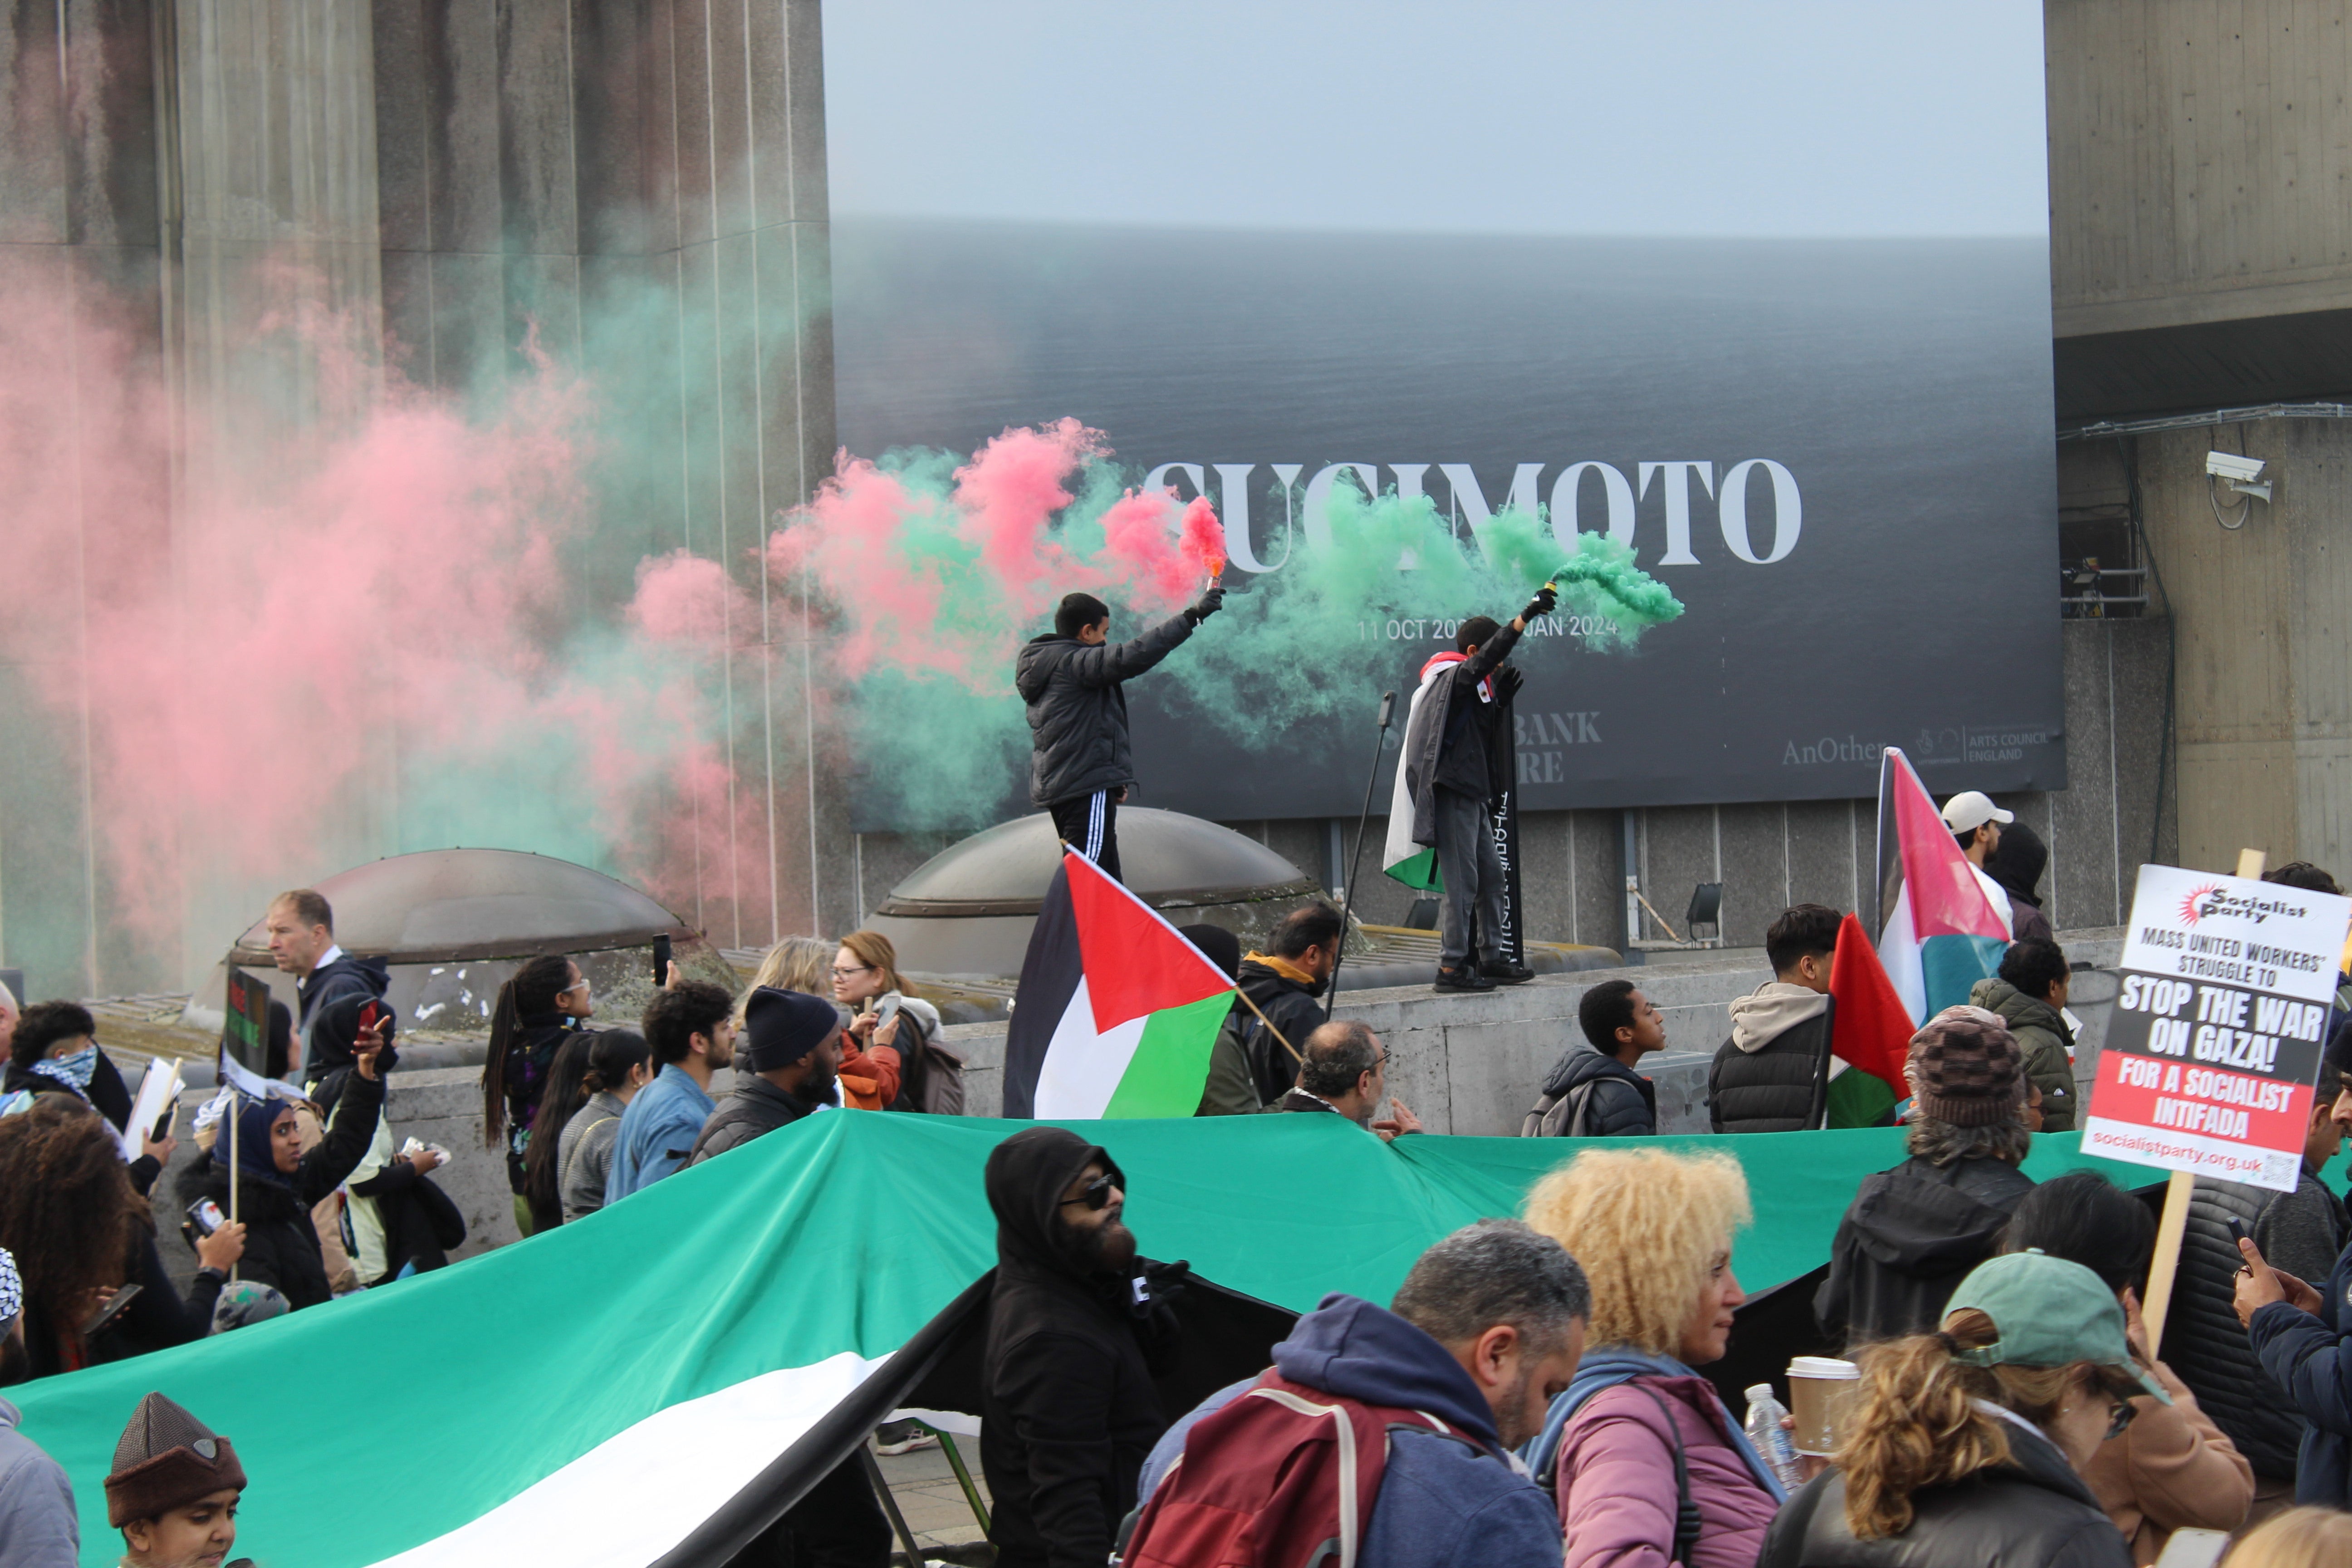 London has seen pro-Palestine marches each weekend since the 7 October Hamas attack and Israeli bombardment of Gaza